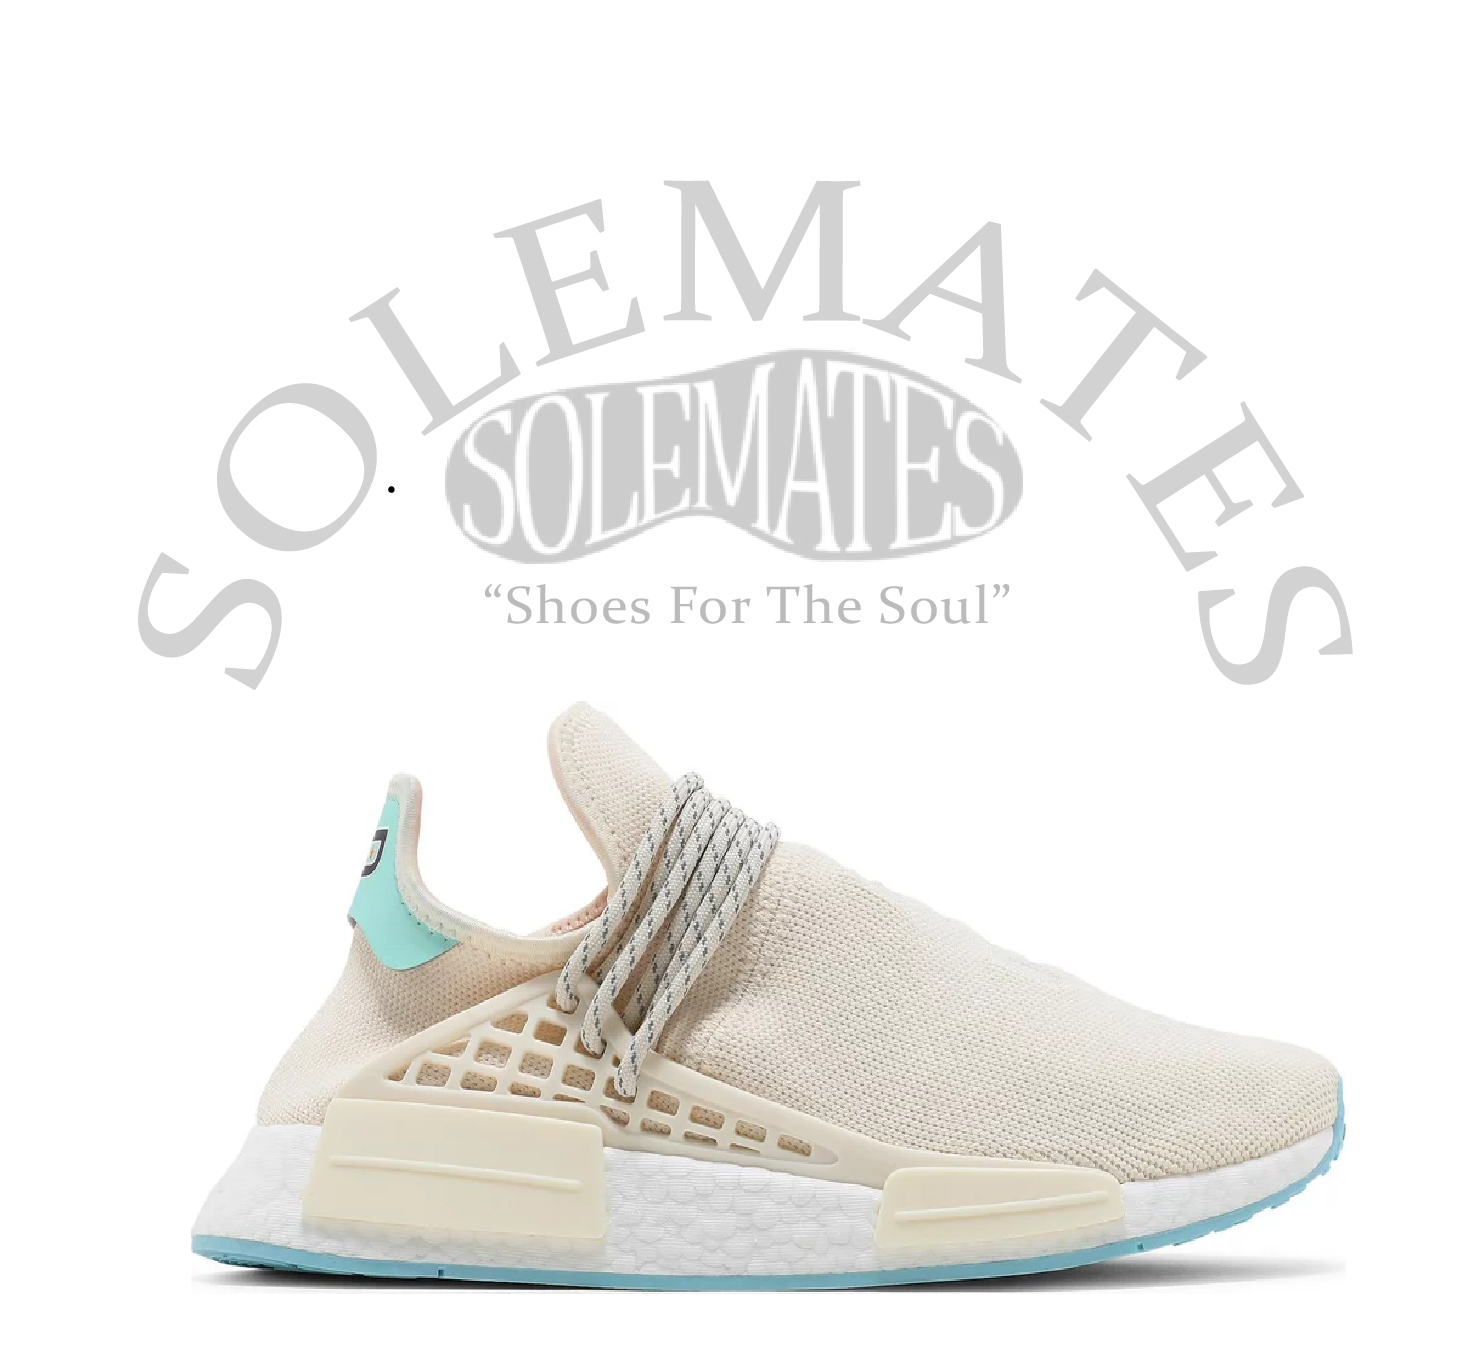 x N.E.R.D. NMD Human Race Anniversary" Solemates Boutique